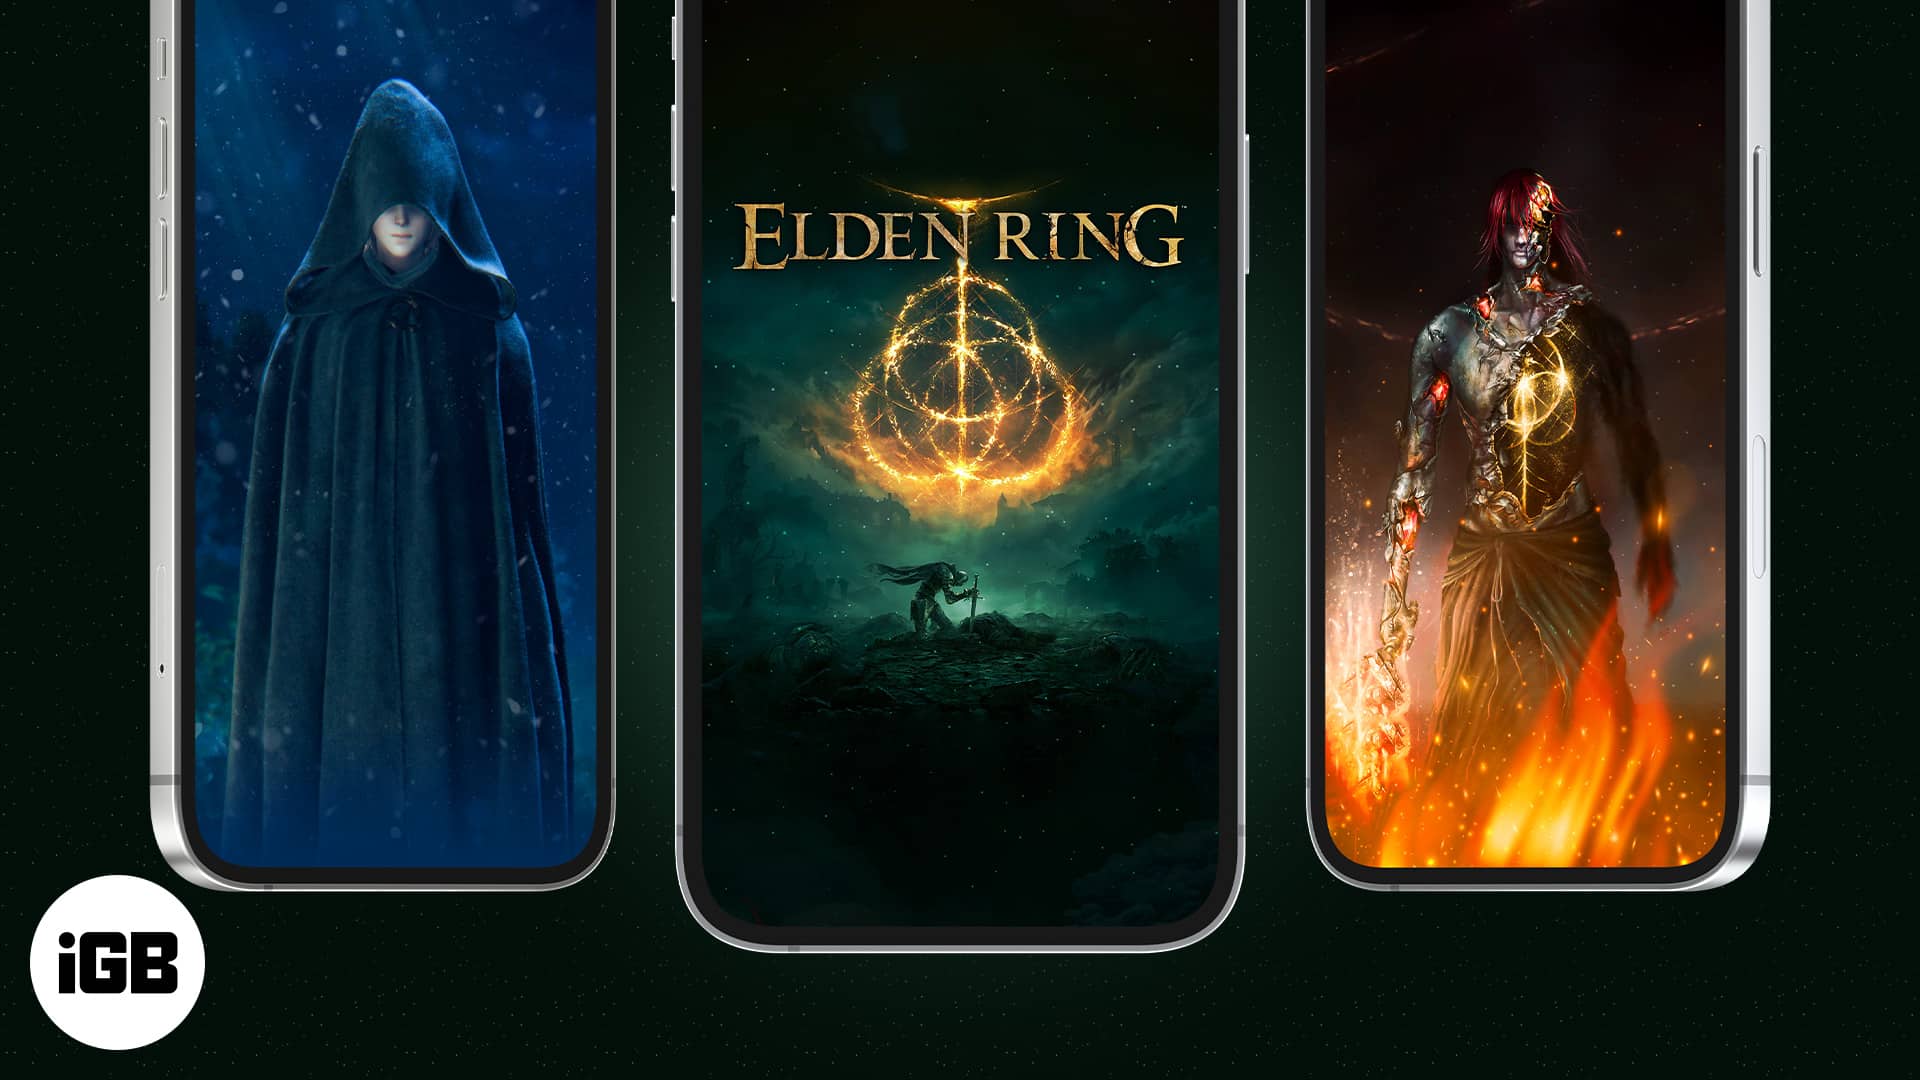 Iphone And Android Godfrey Elden Ring Phone Live Wallpaper